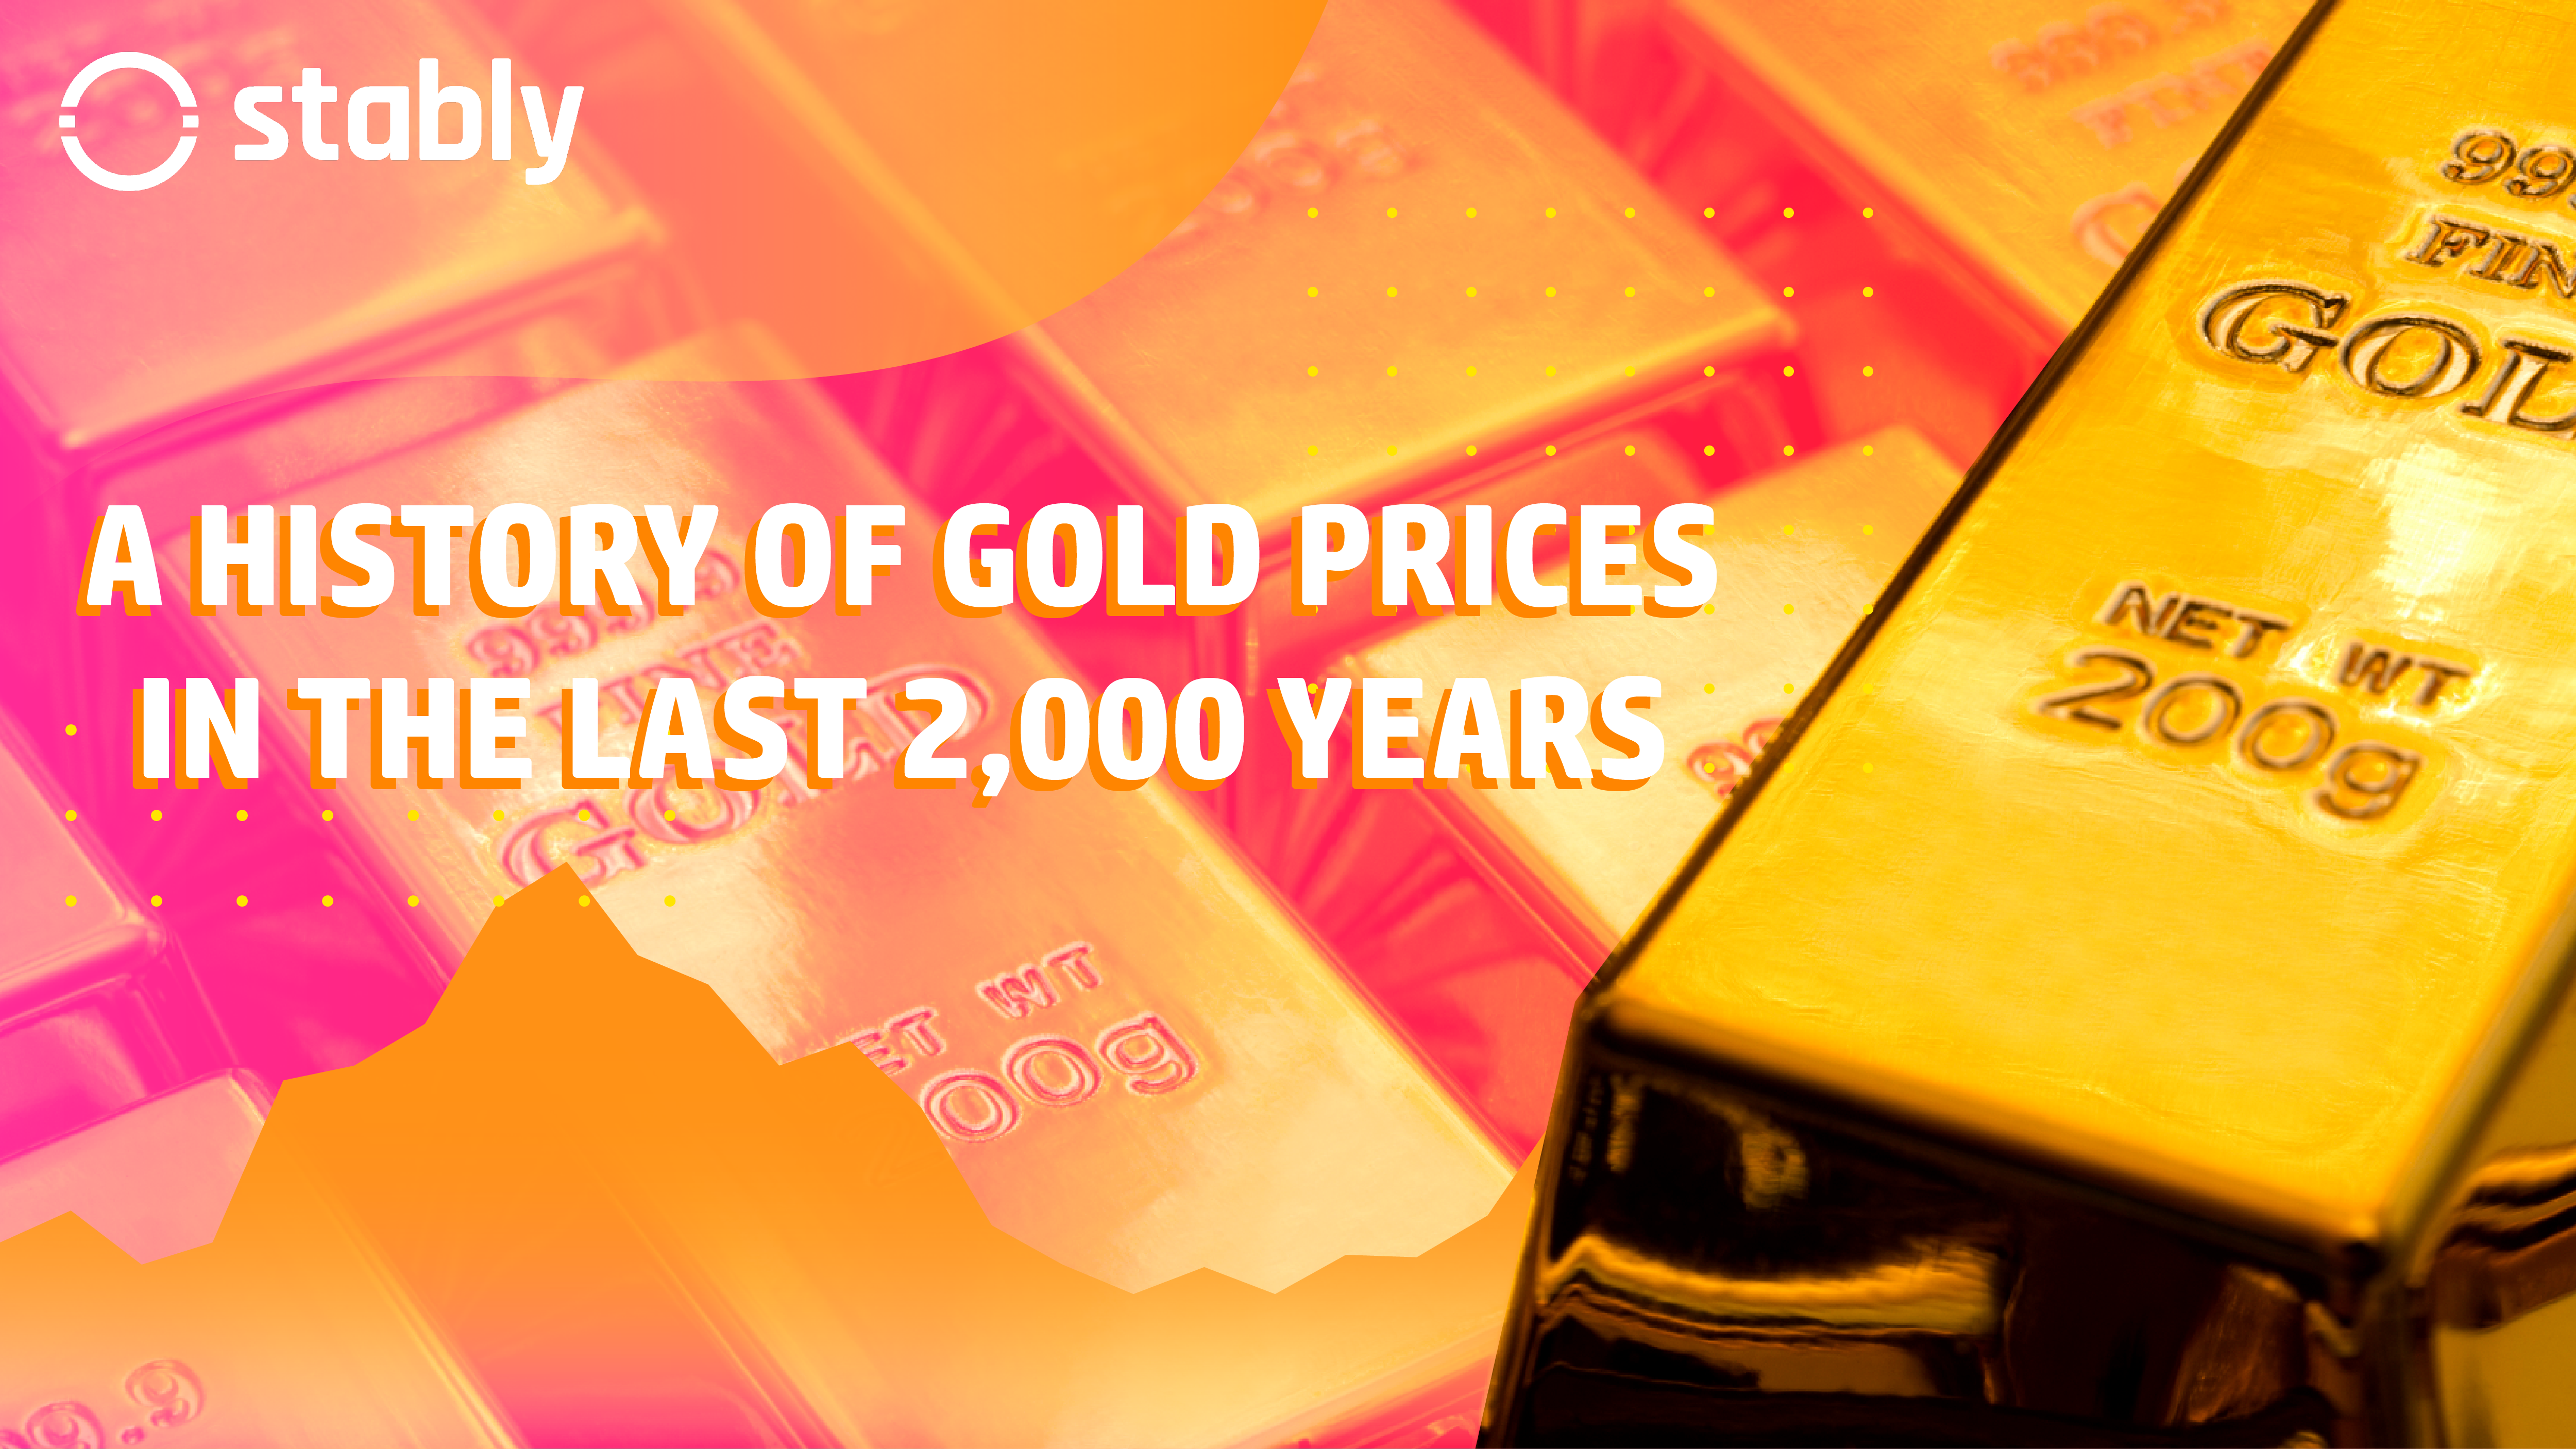 A History Of Gold Prices In The Last 2,000 Years_Stably-01